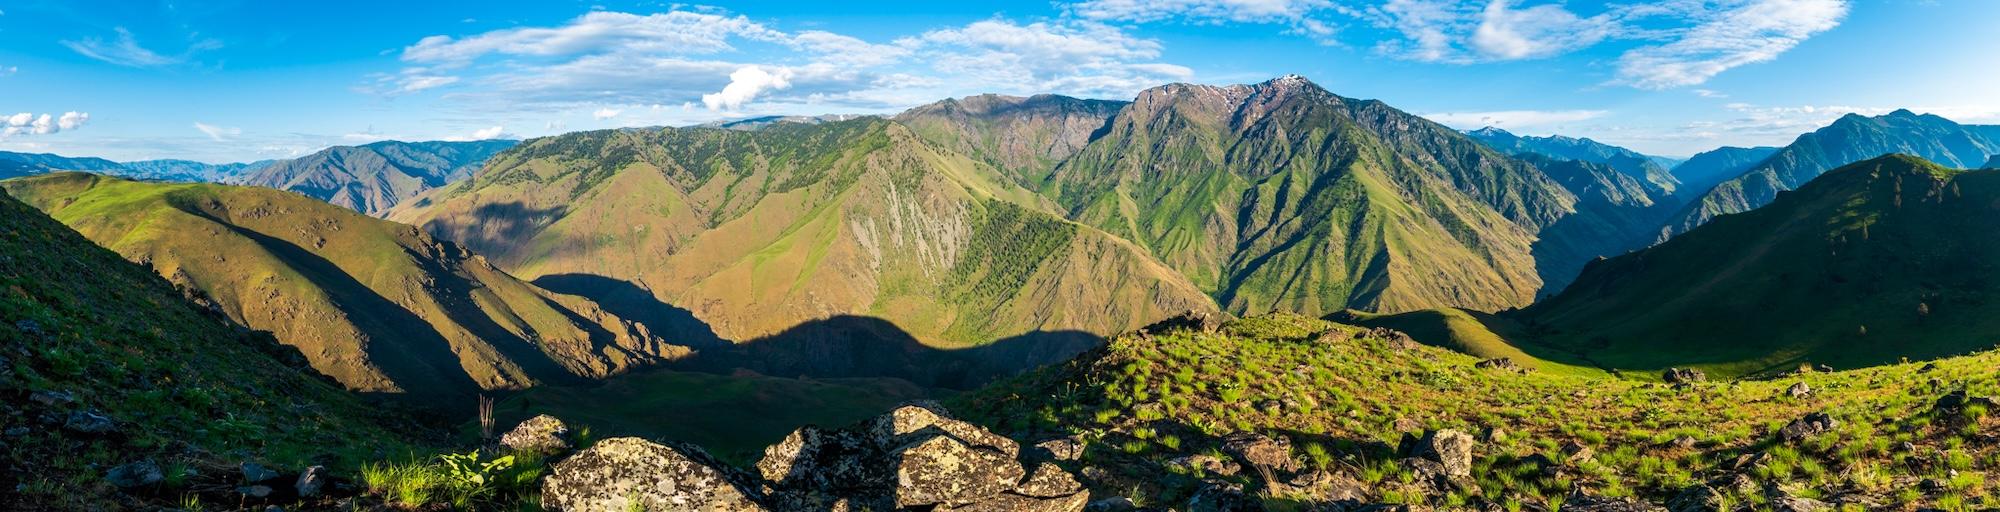 Panorama of Hells Canyon in the evening light.